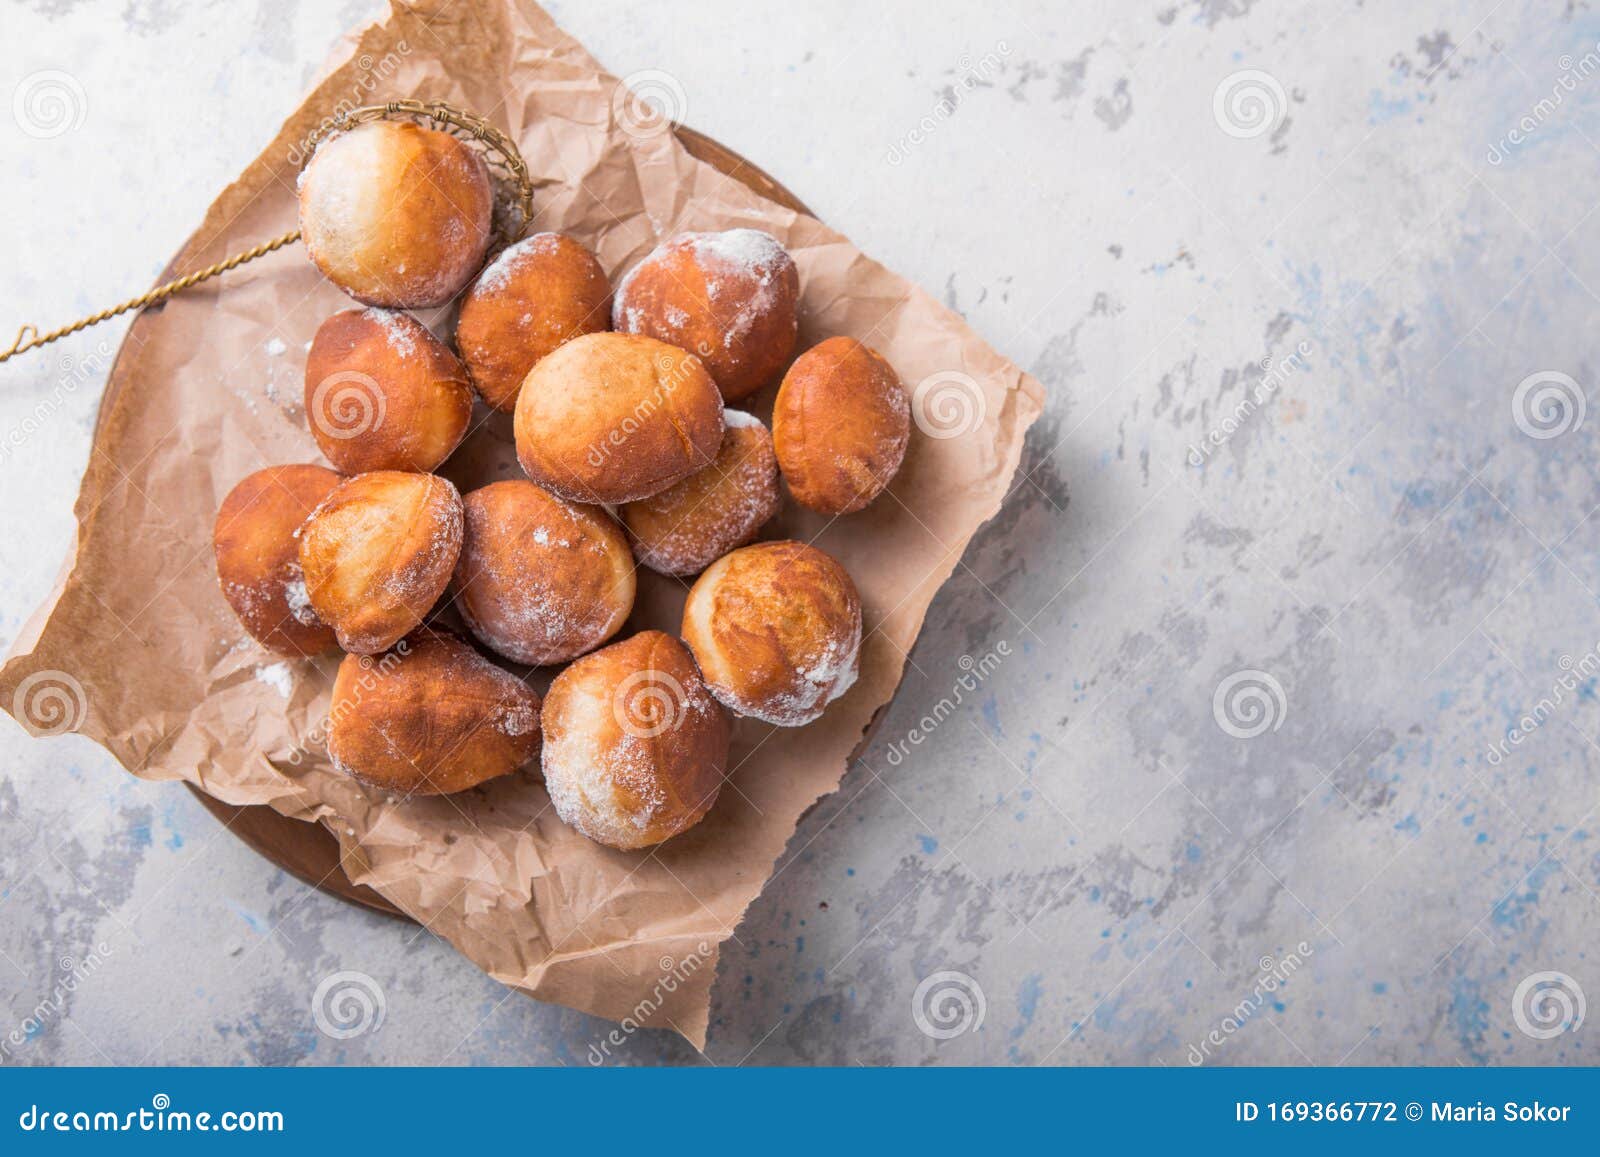 bunuelos mexican fritters golden, crispy-sweet, tortilla-like fritters. pile of bunyols de quaresma, typical pastries of